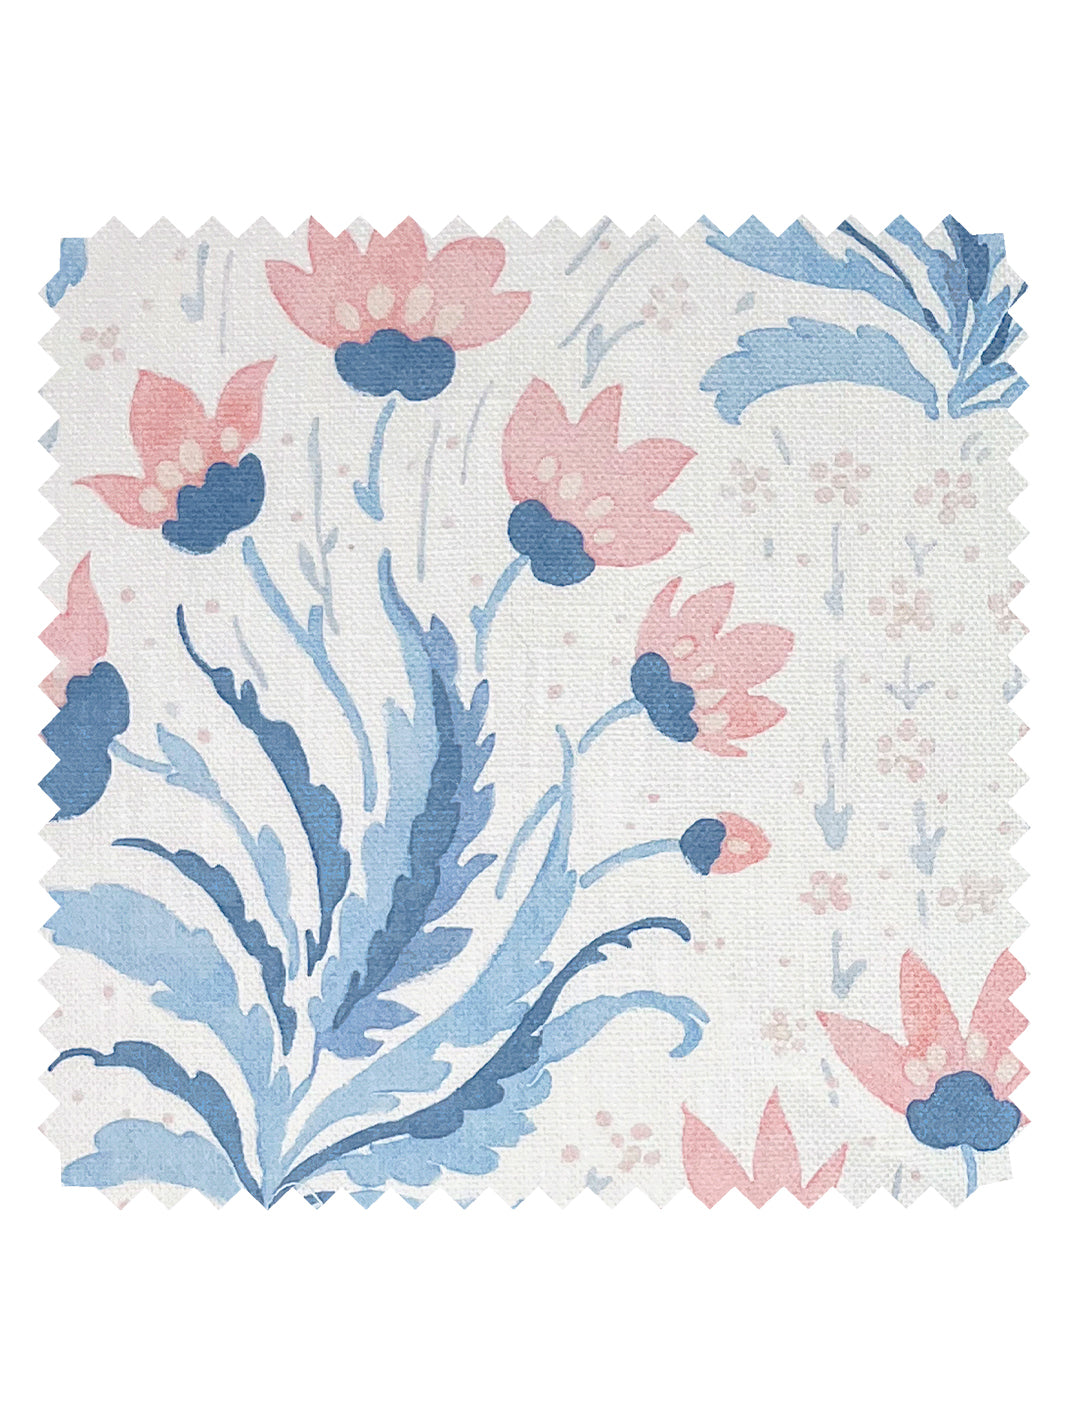 'Hillhouse Floral Multi' Linen Fabric by Nathan Turner - Pink Blue